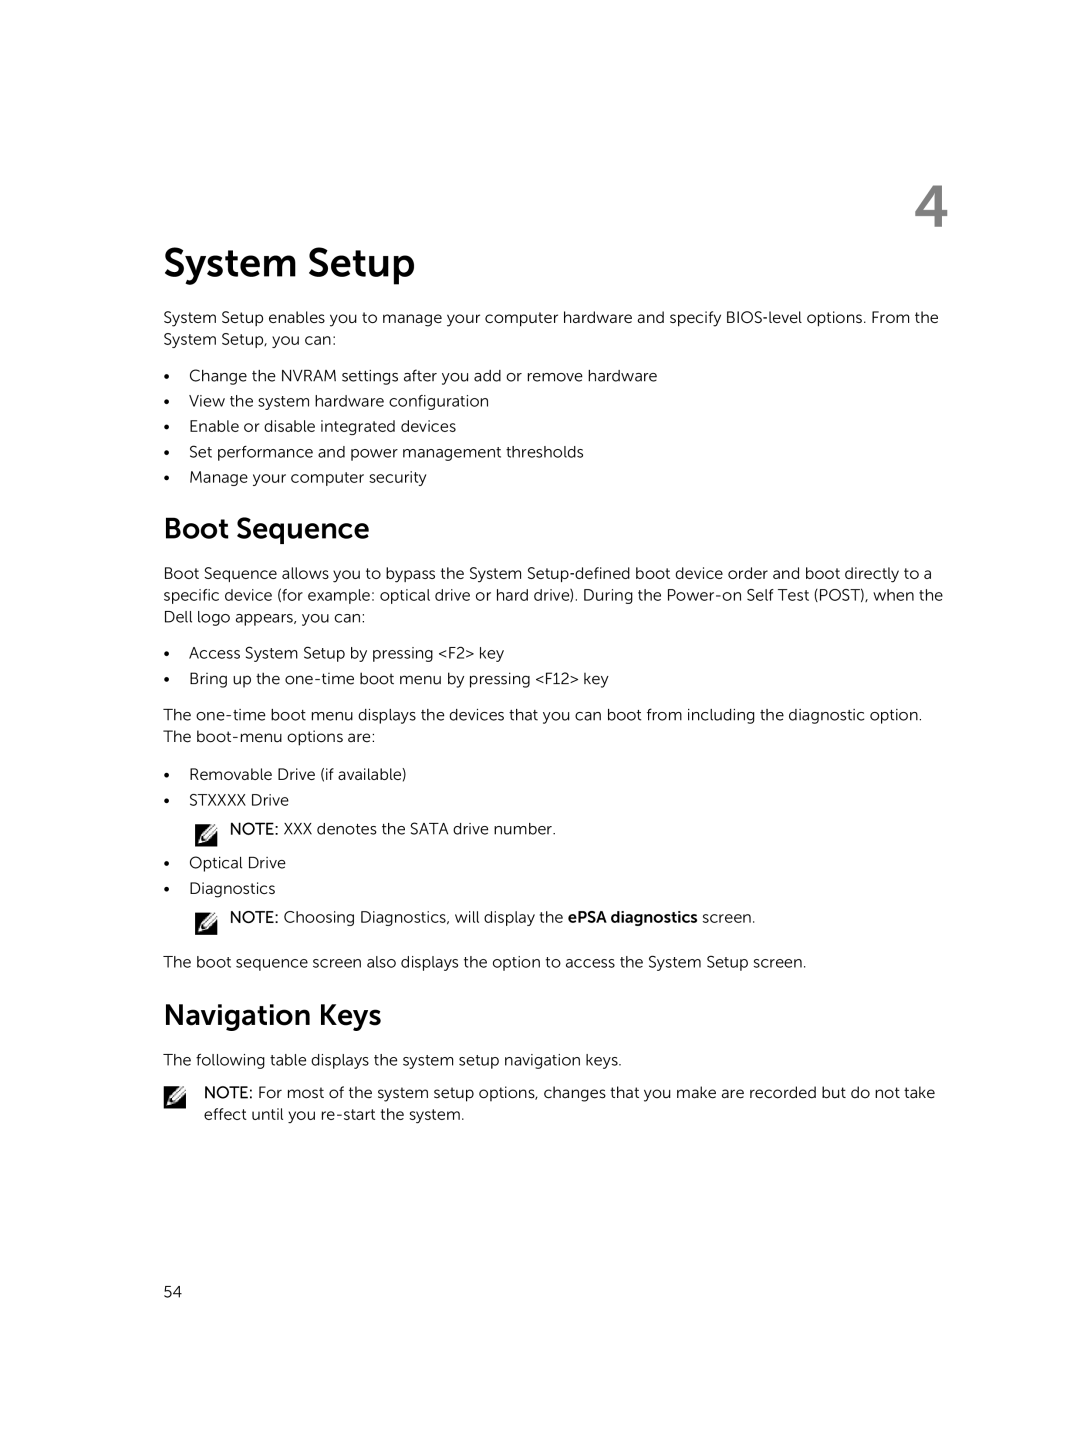 Dell P45G owner manual Boot Sequence, Navigation Keys 